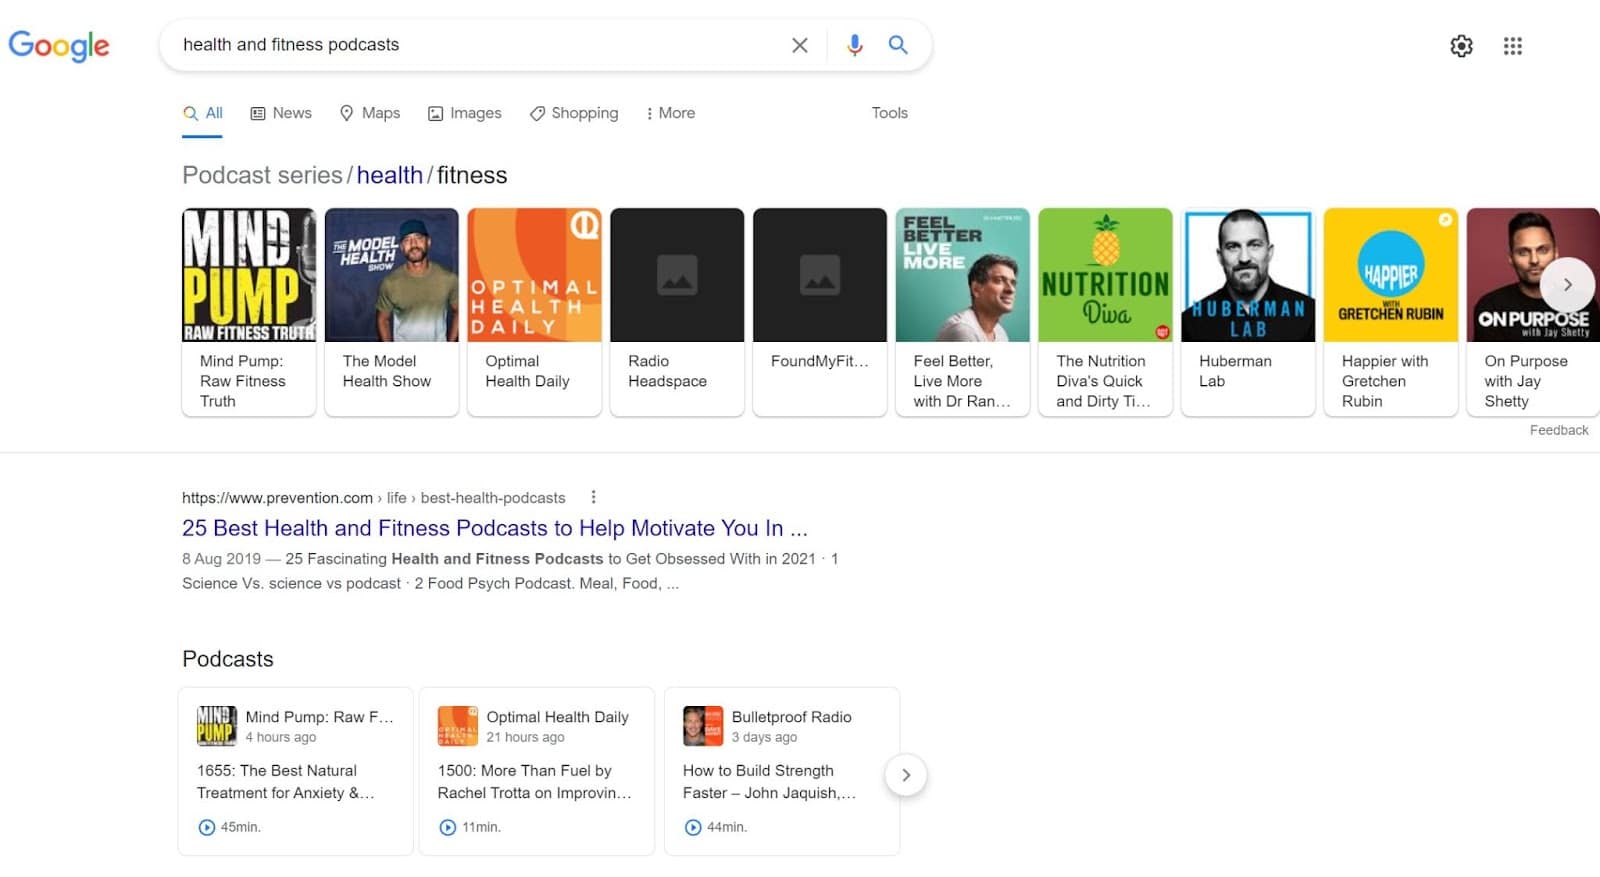 Google search results for "health and fitness podcasts